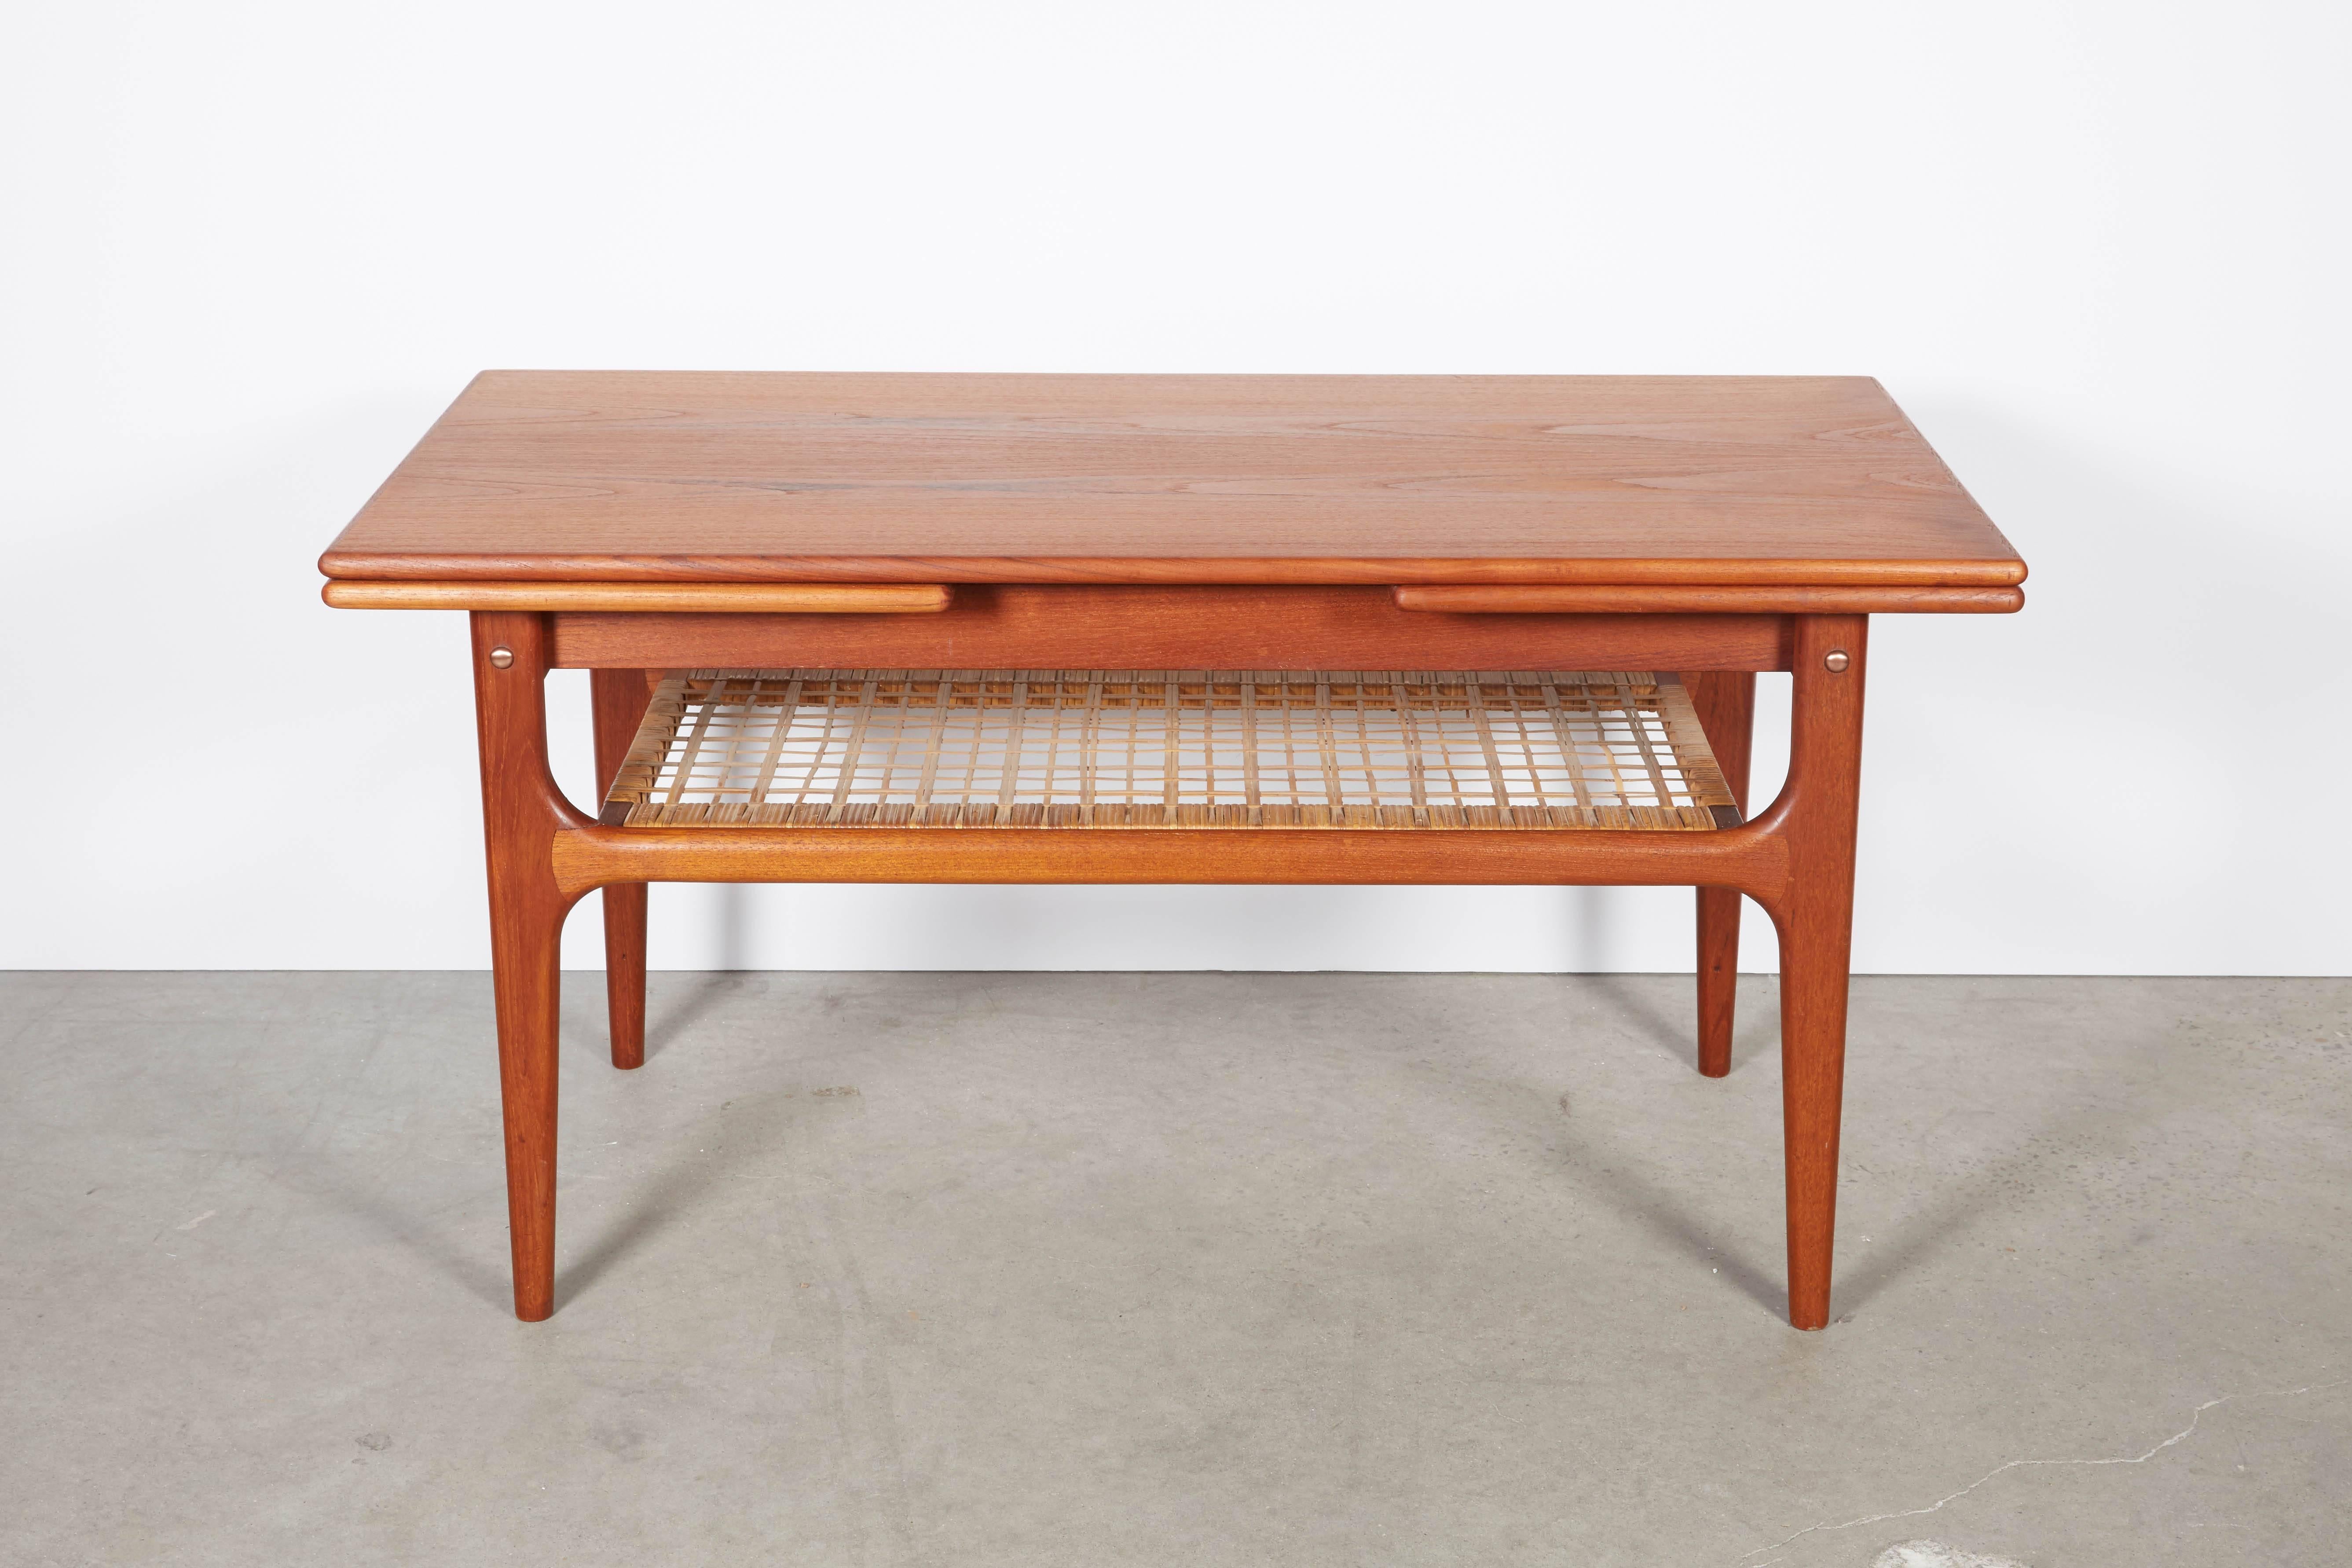 Danish Mid-Century Modern Teak Coffee Table with Two Leaves